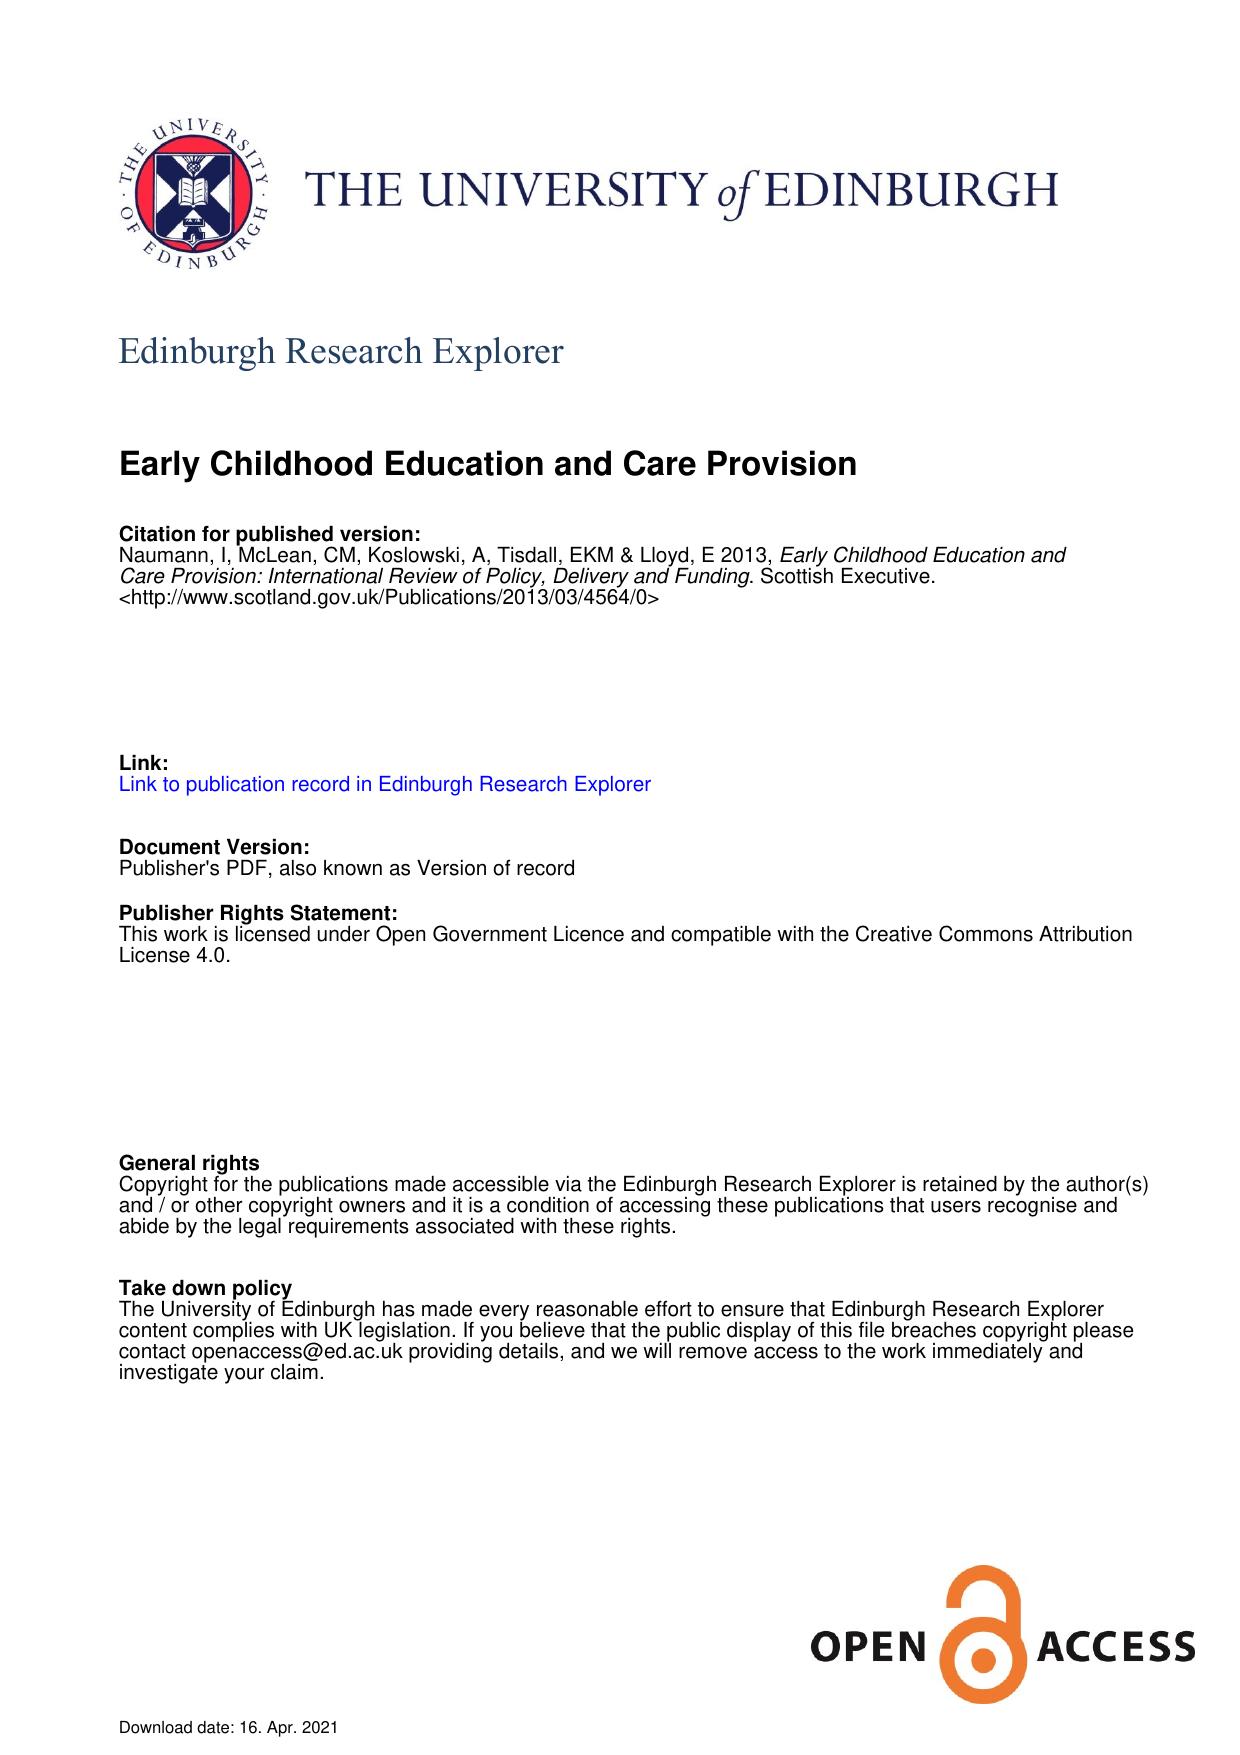 Early Childhood Education And Care Provision: International Review Of Policy, Delivery And Funding Final Report